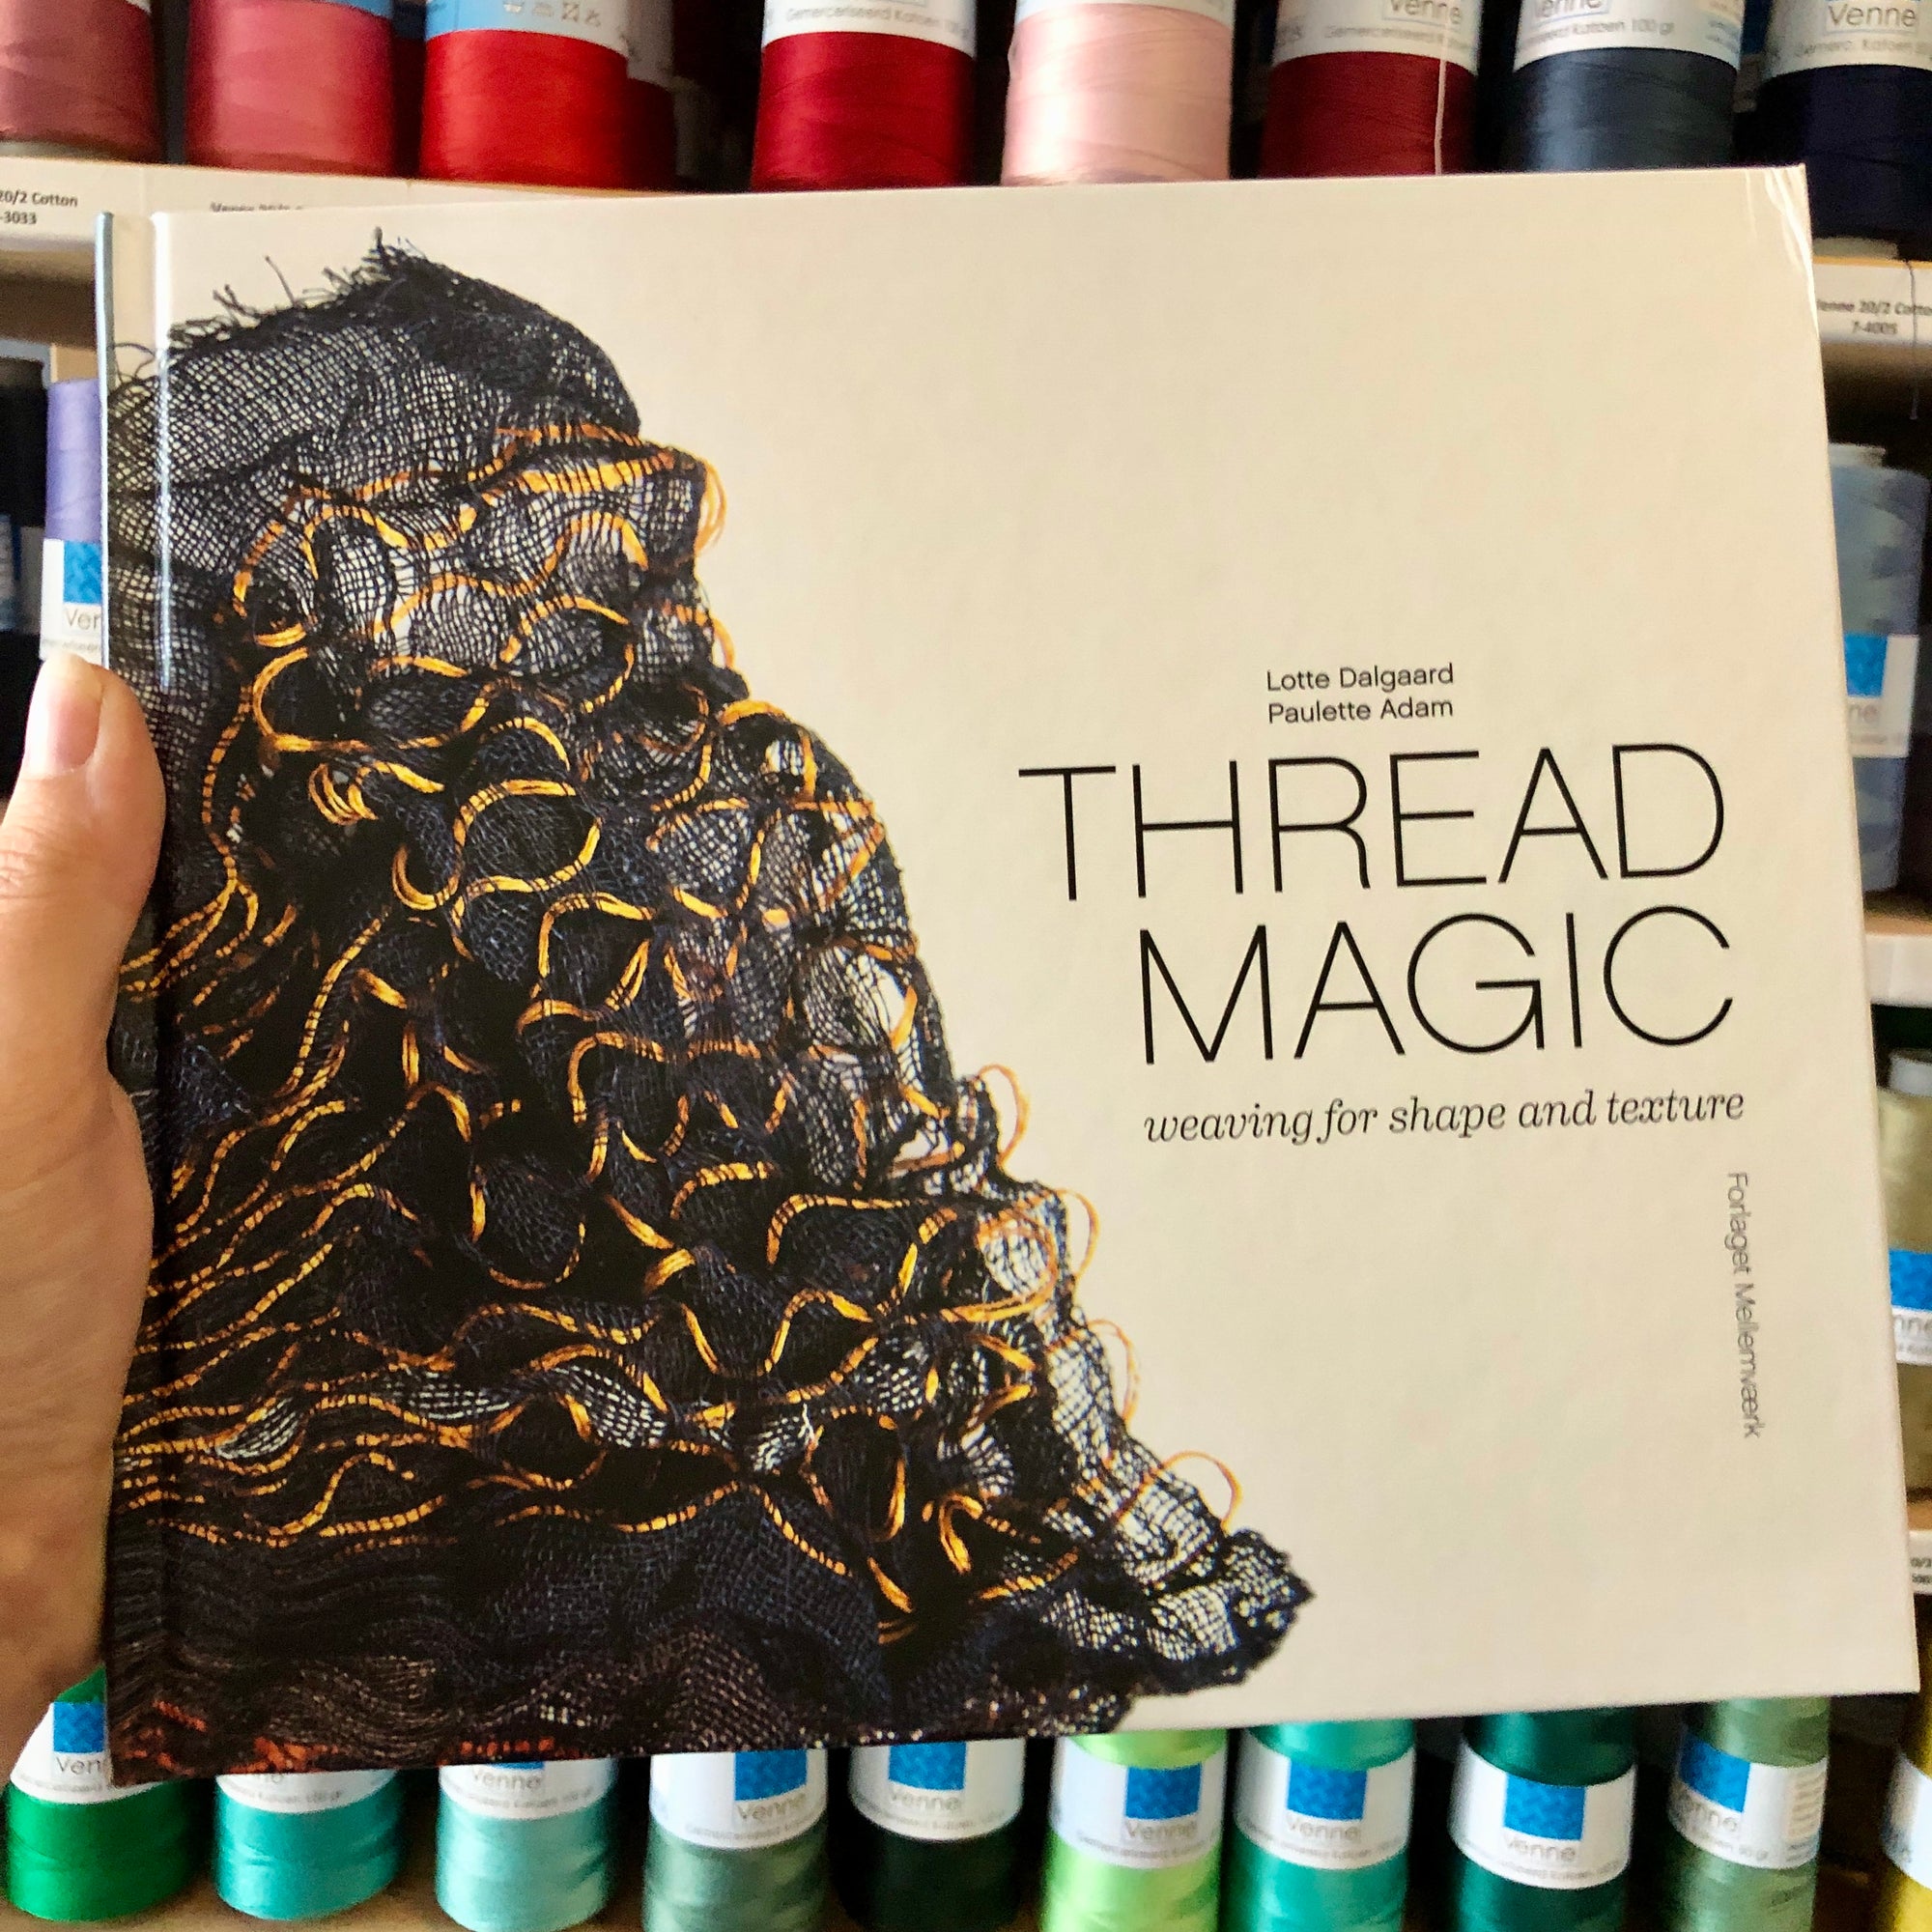 Thread Magic weaving for shape and texture